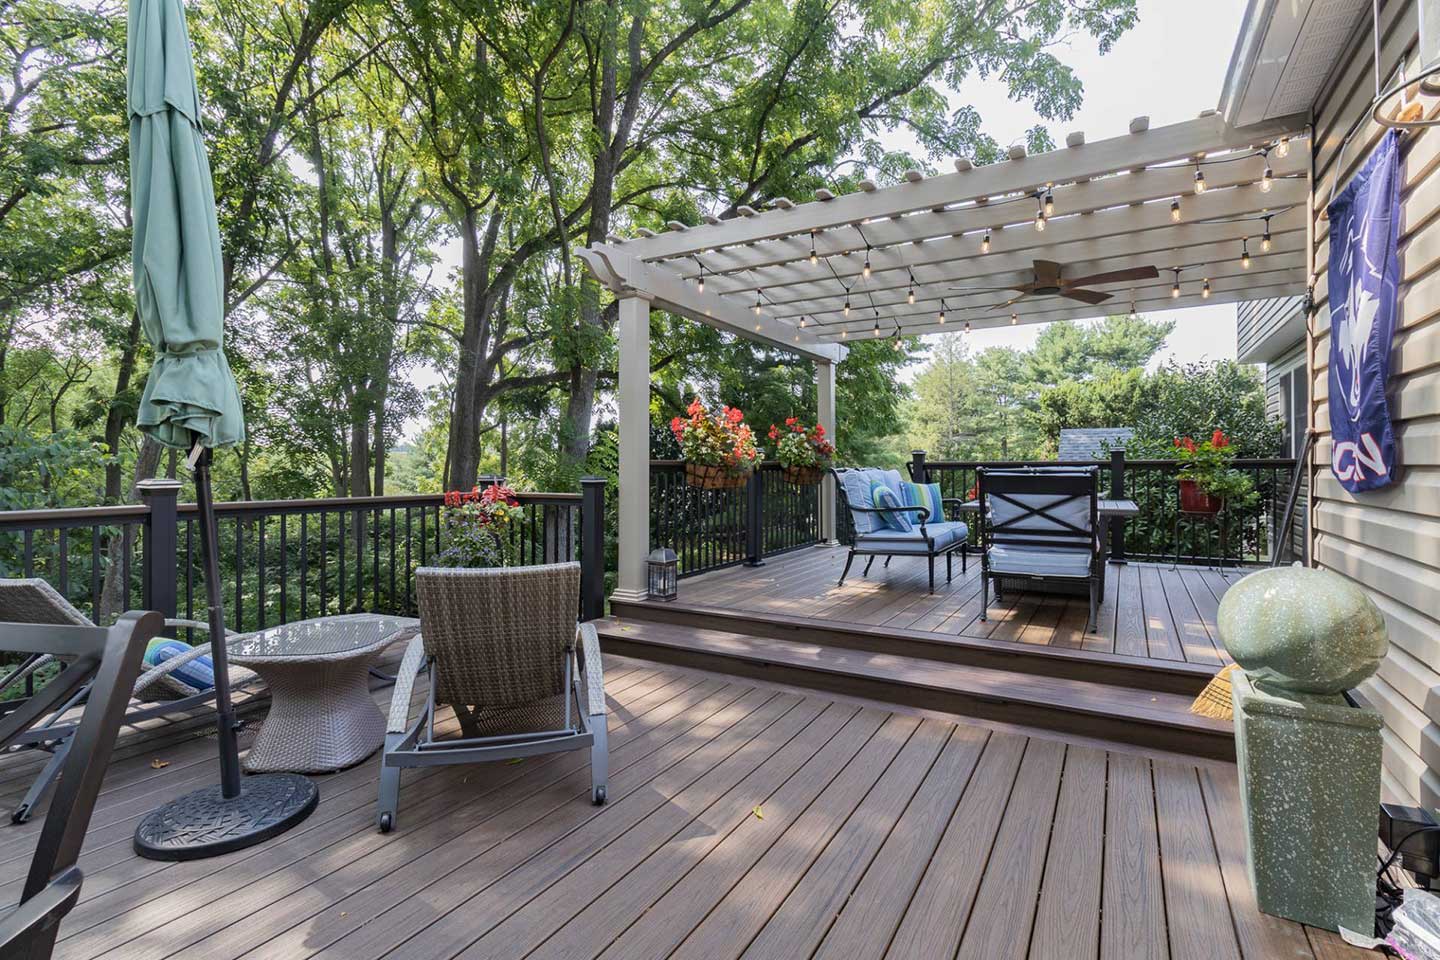 A second story luxury wood deck off the back of a house with a pergola overtop